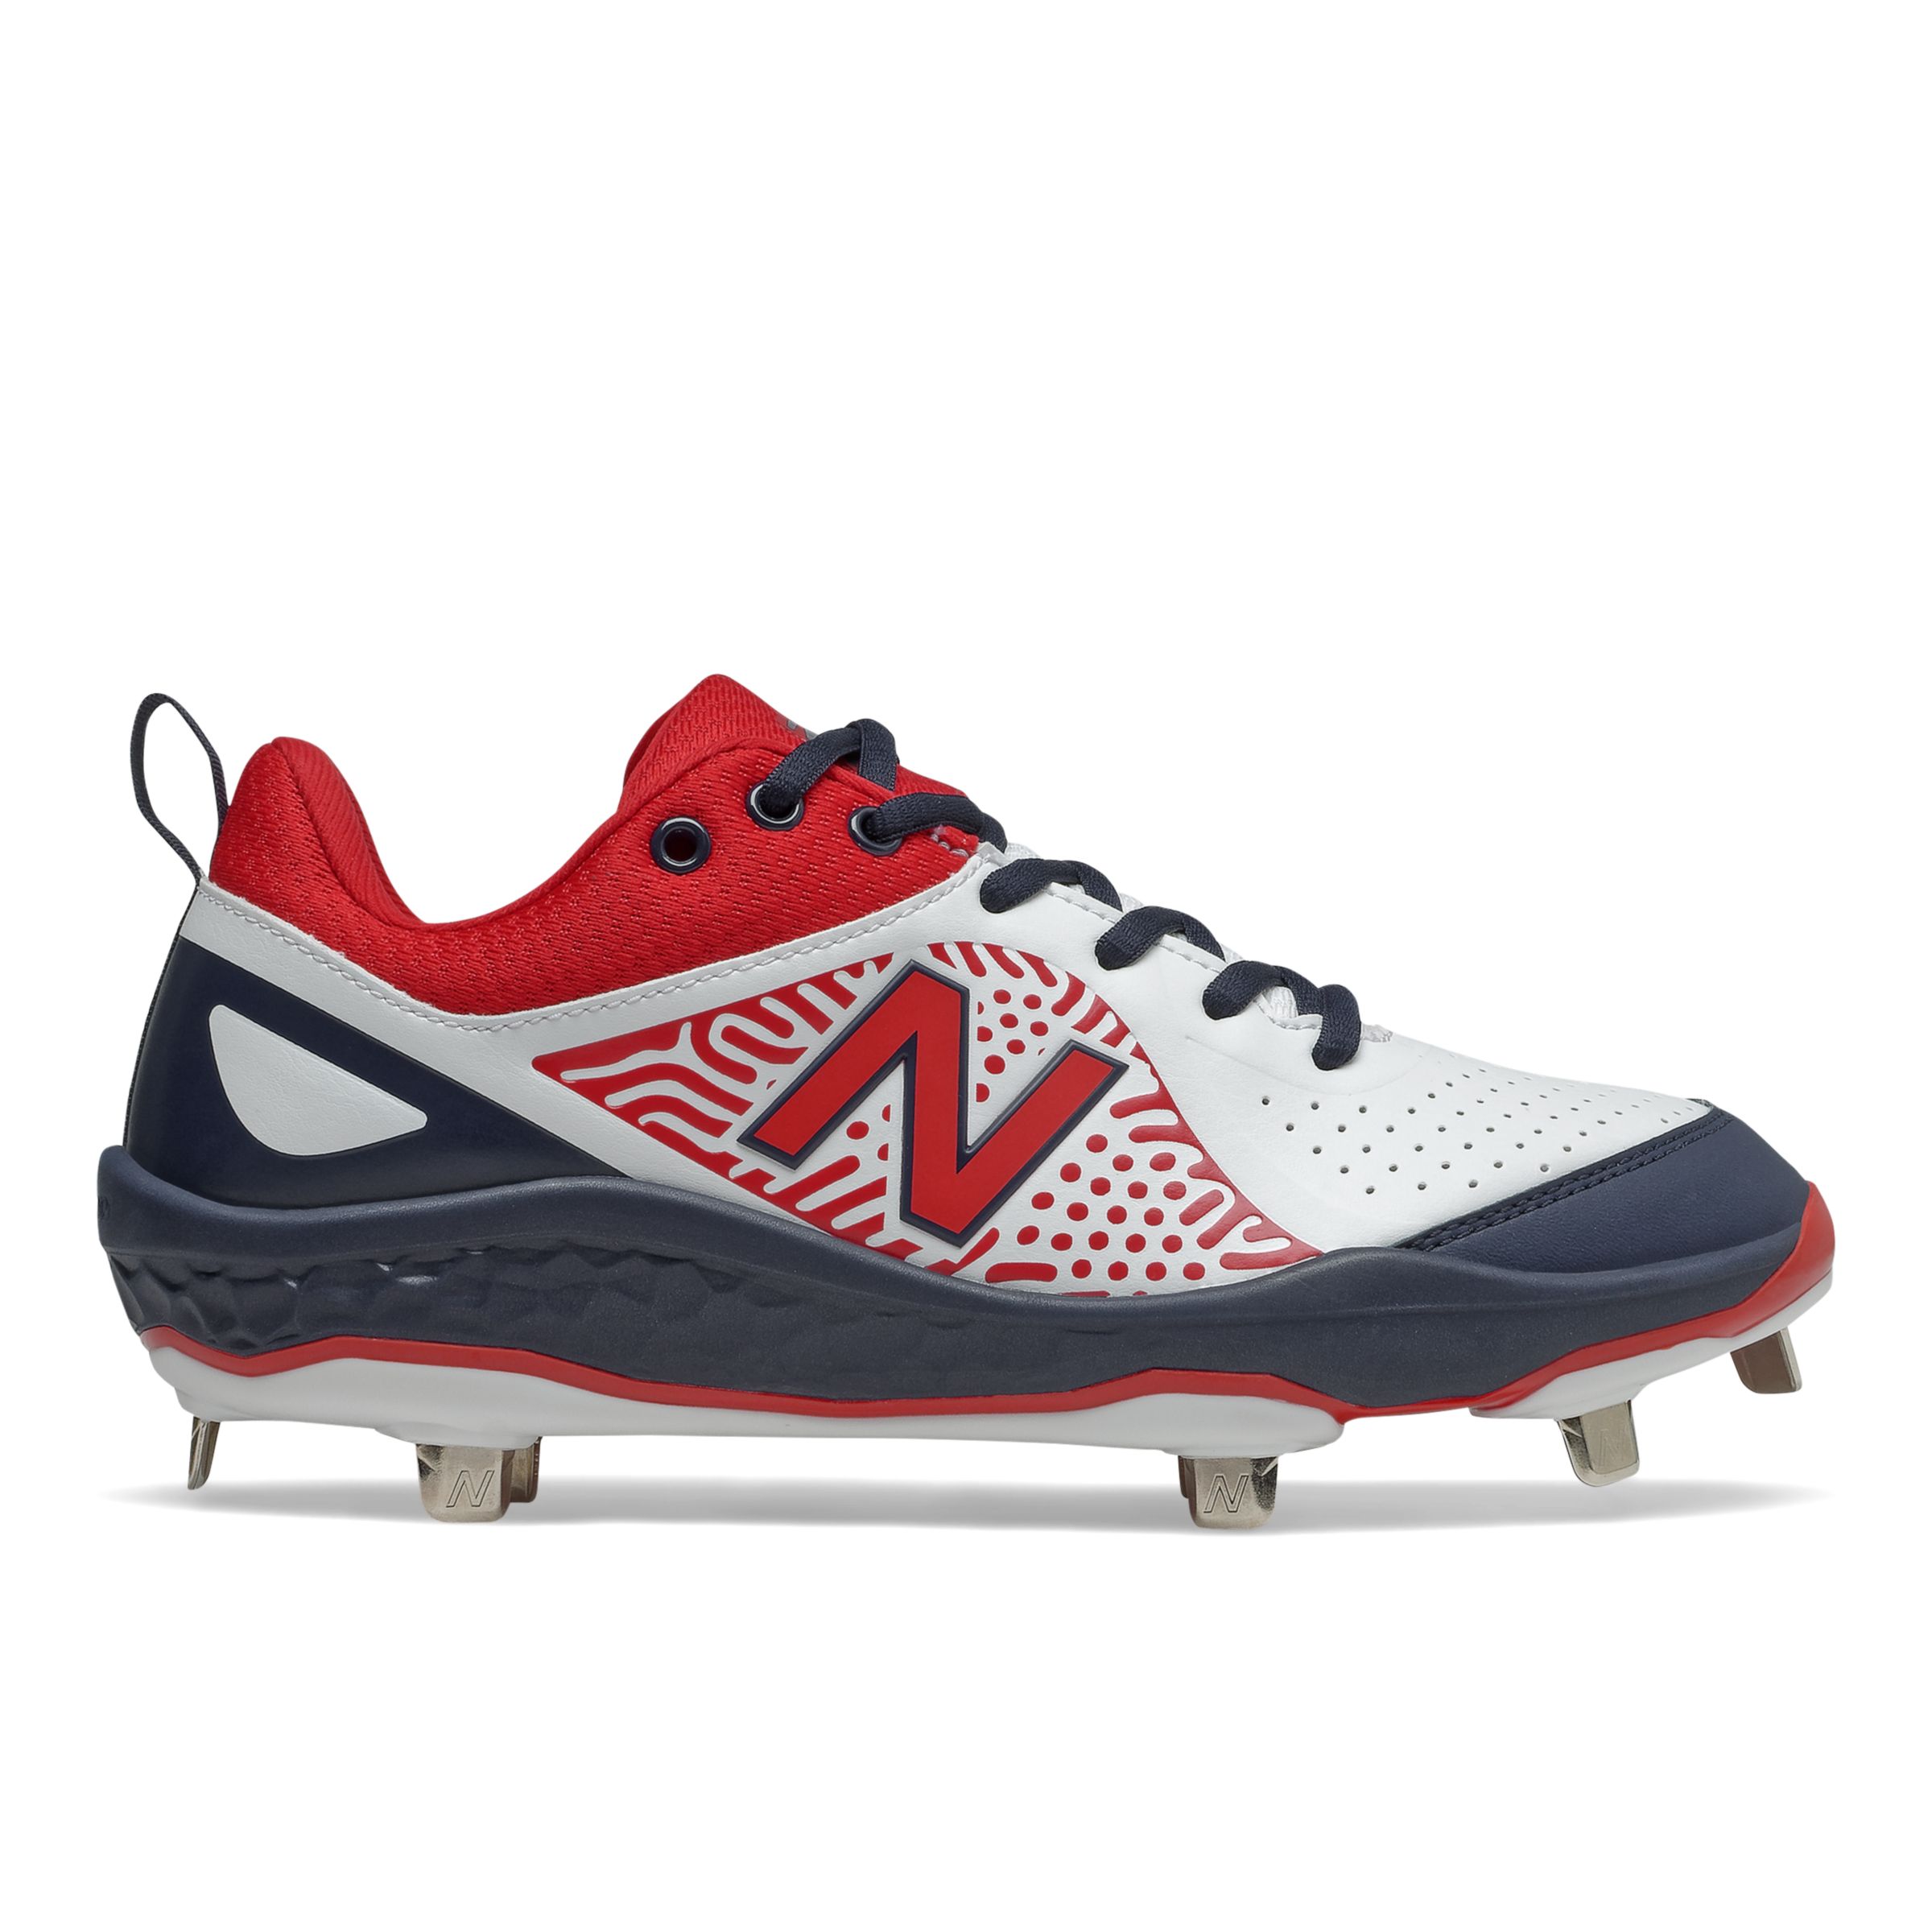 new balance metal cleats red